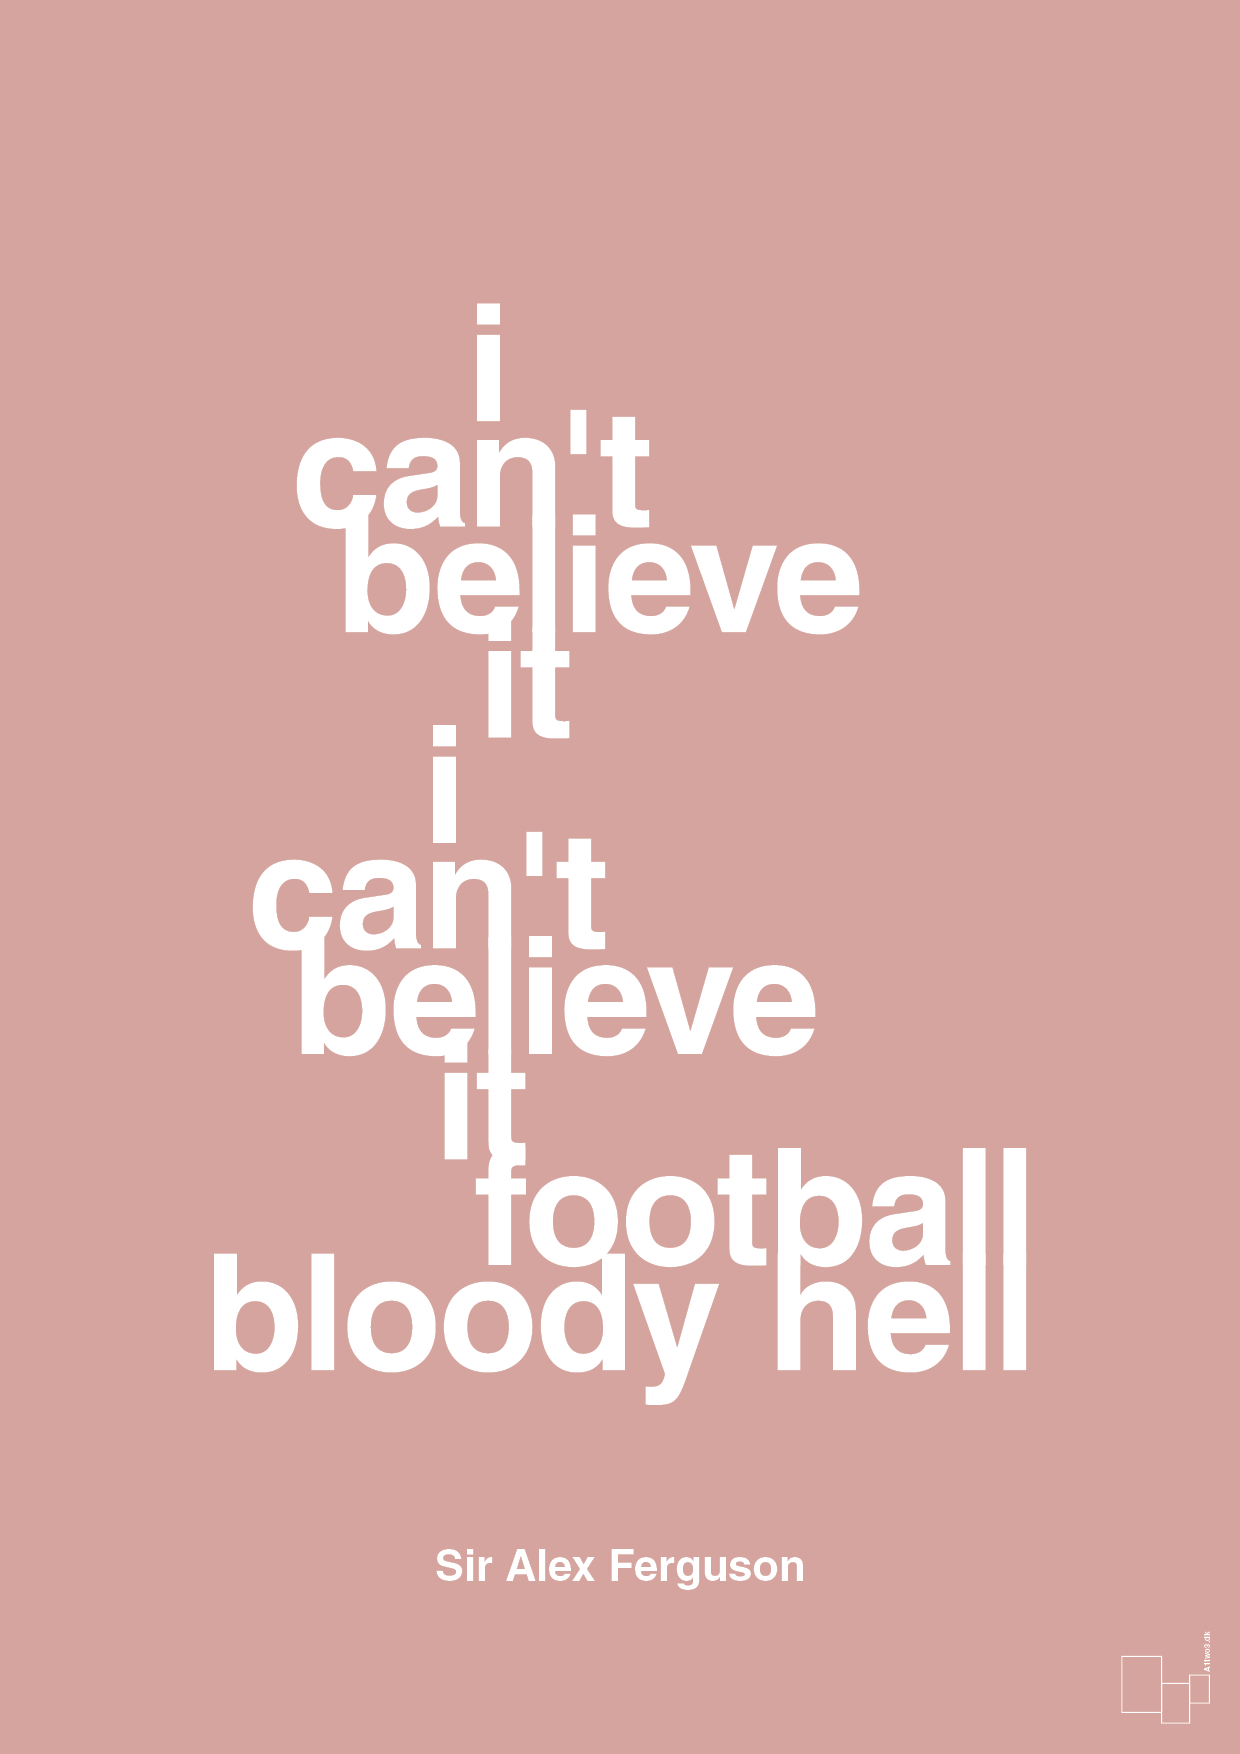 i can't believe it i can't believe it football bloody hell - Plakat med Citater i Bubble Shell